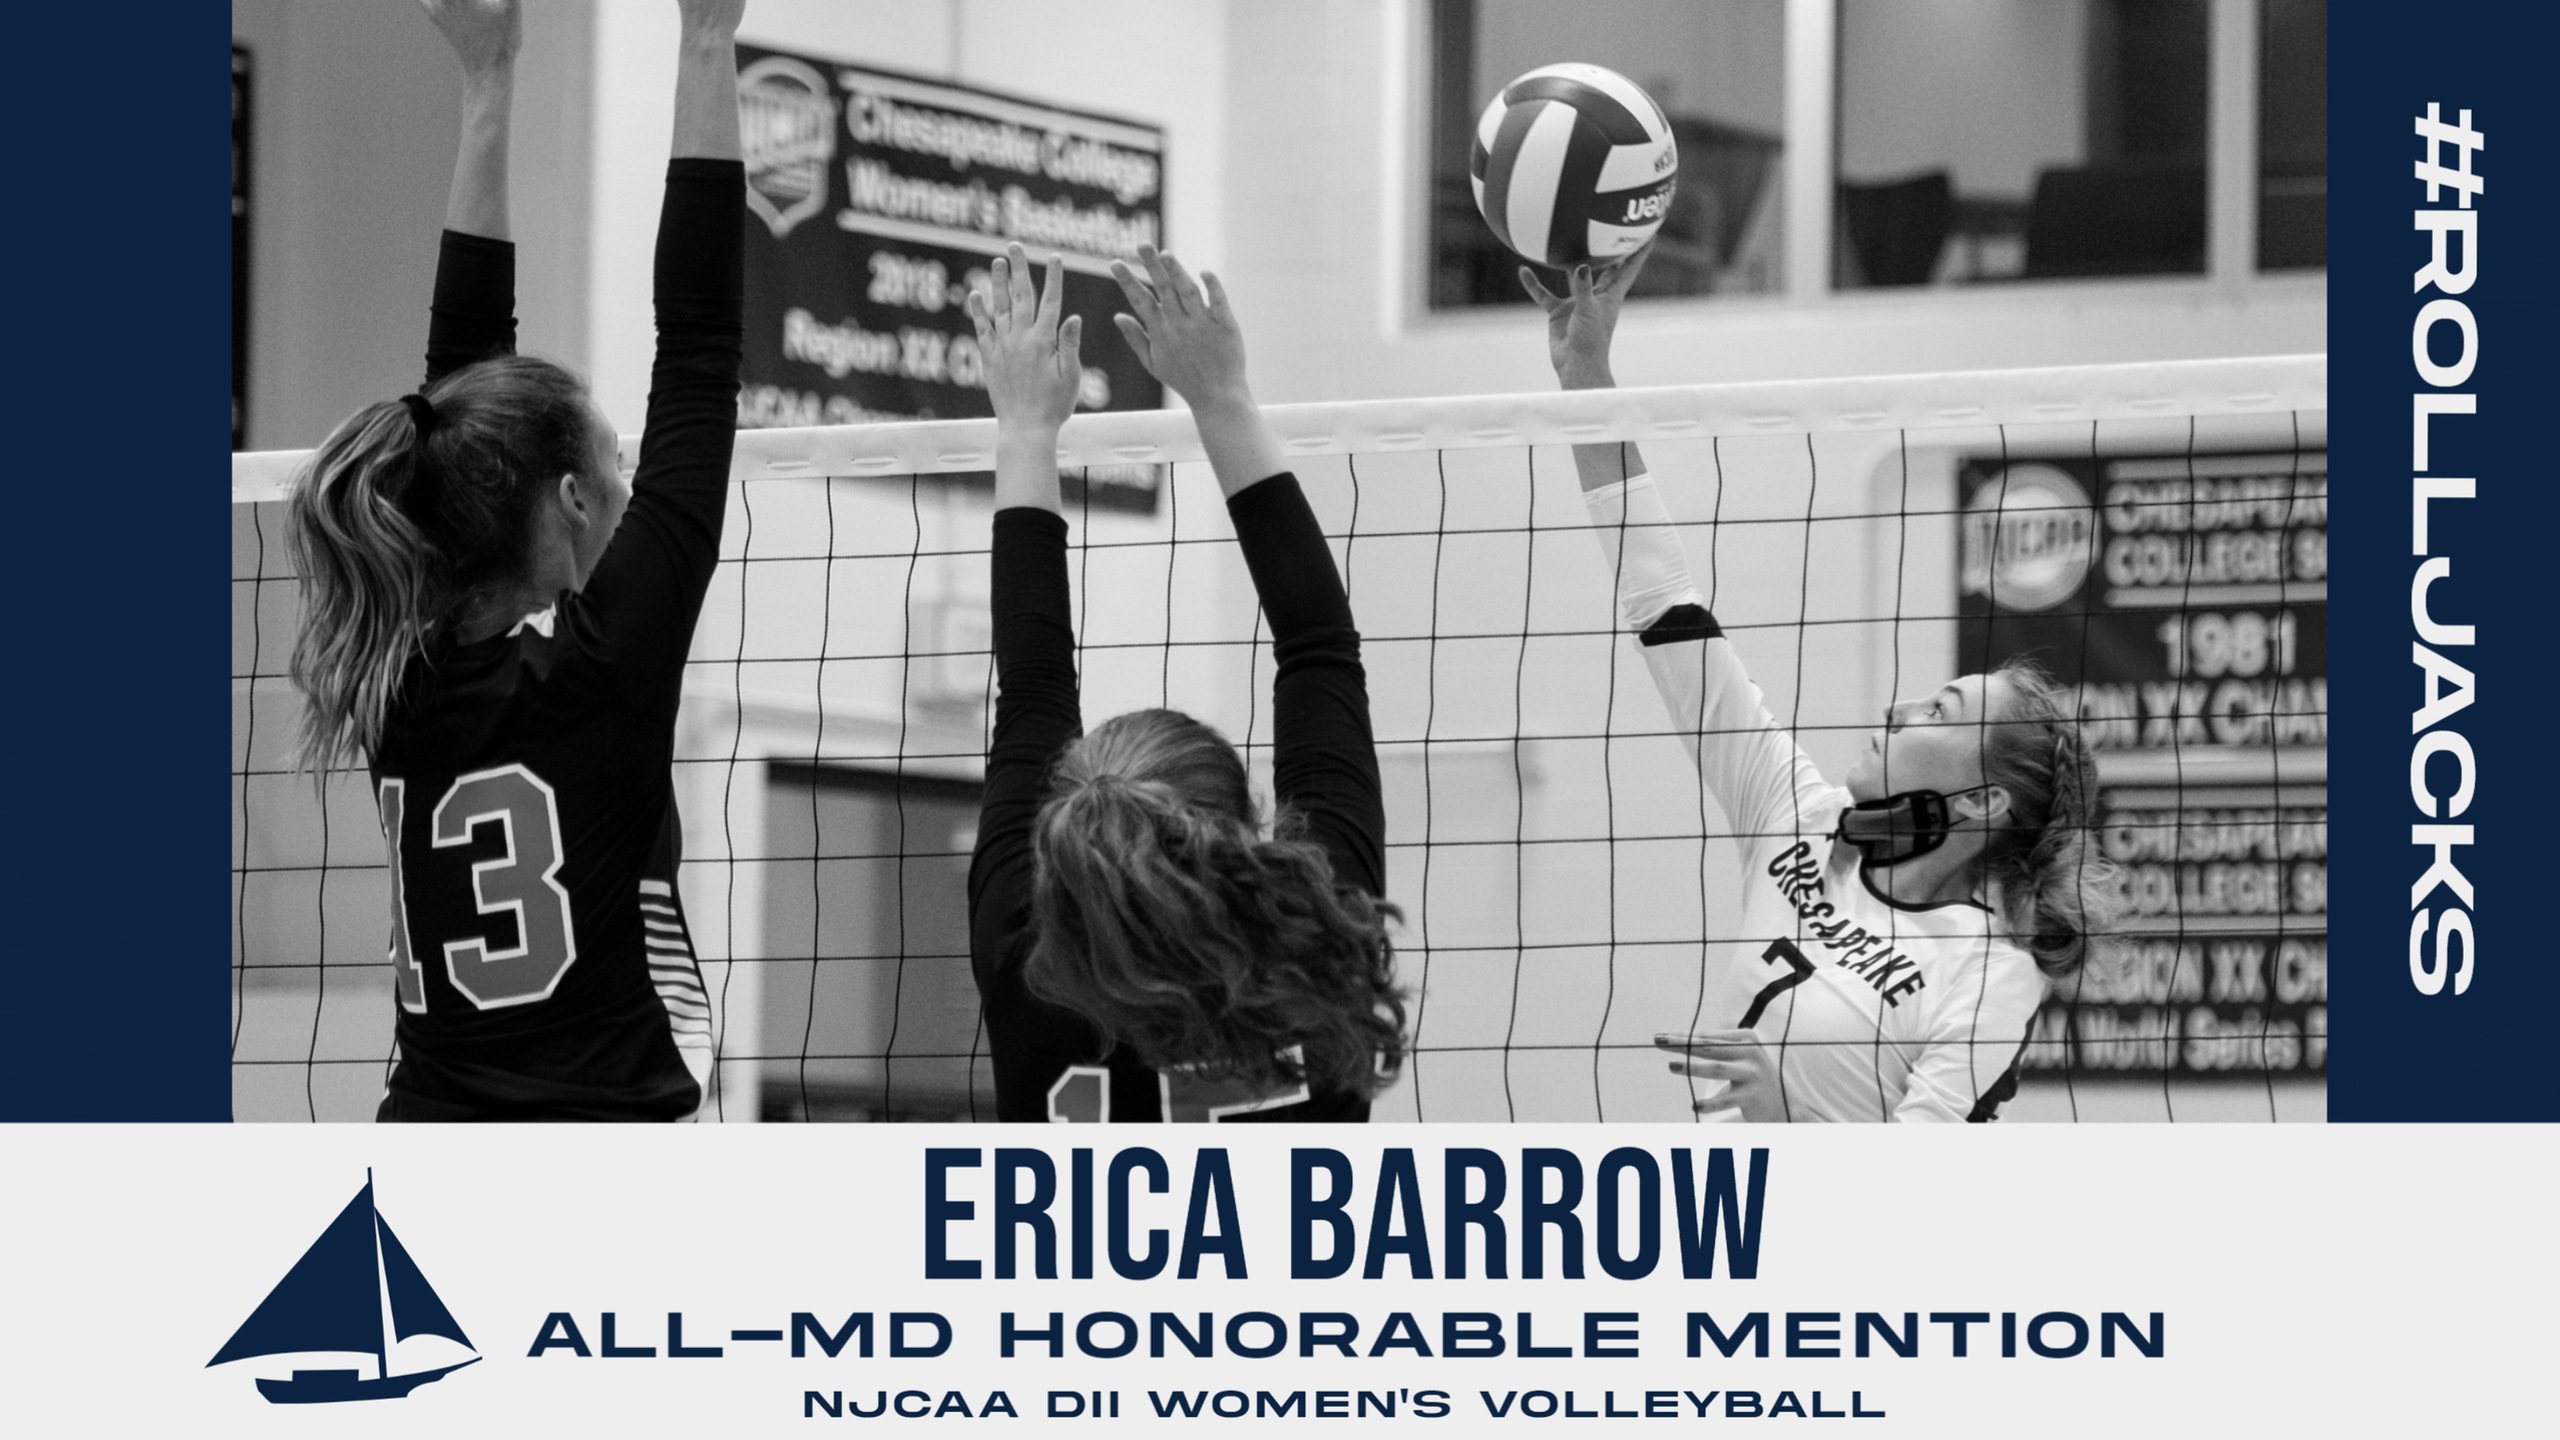 Erica Barrow earns All-MD JUCO honorable mention